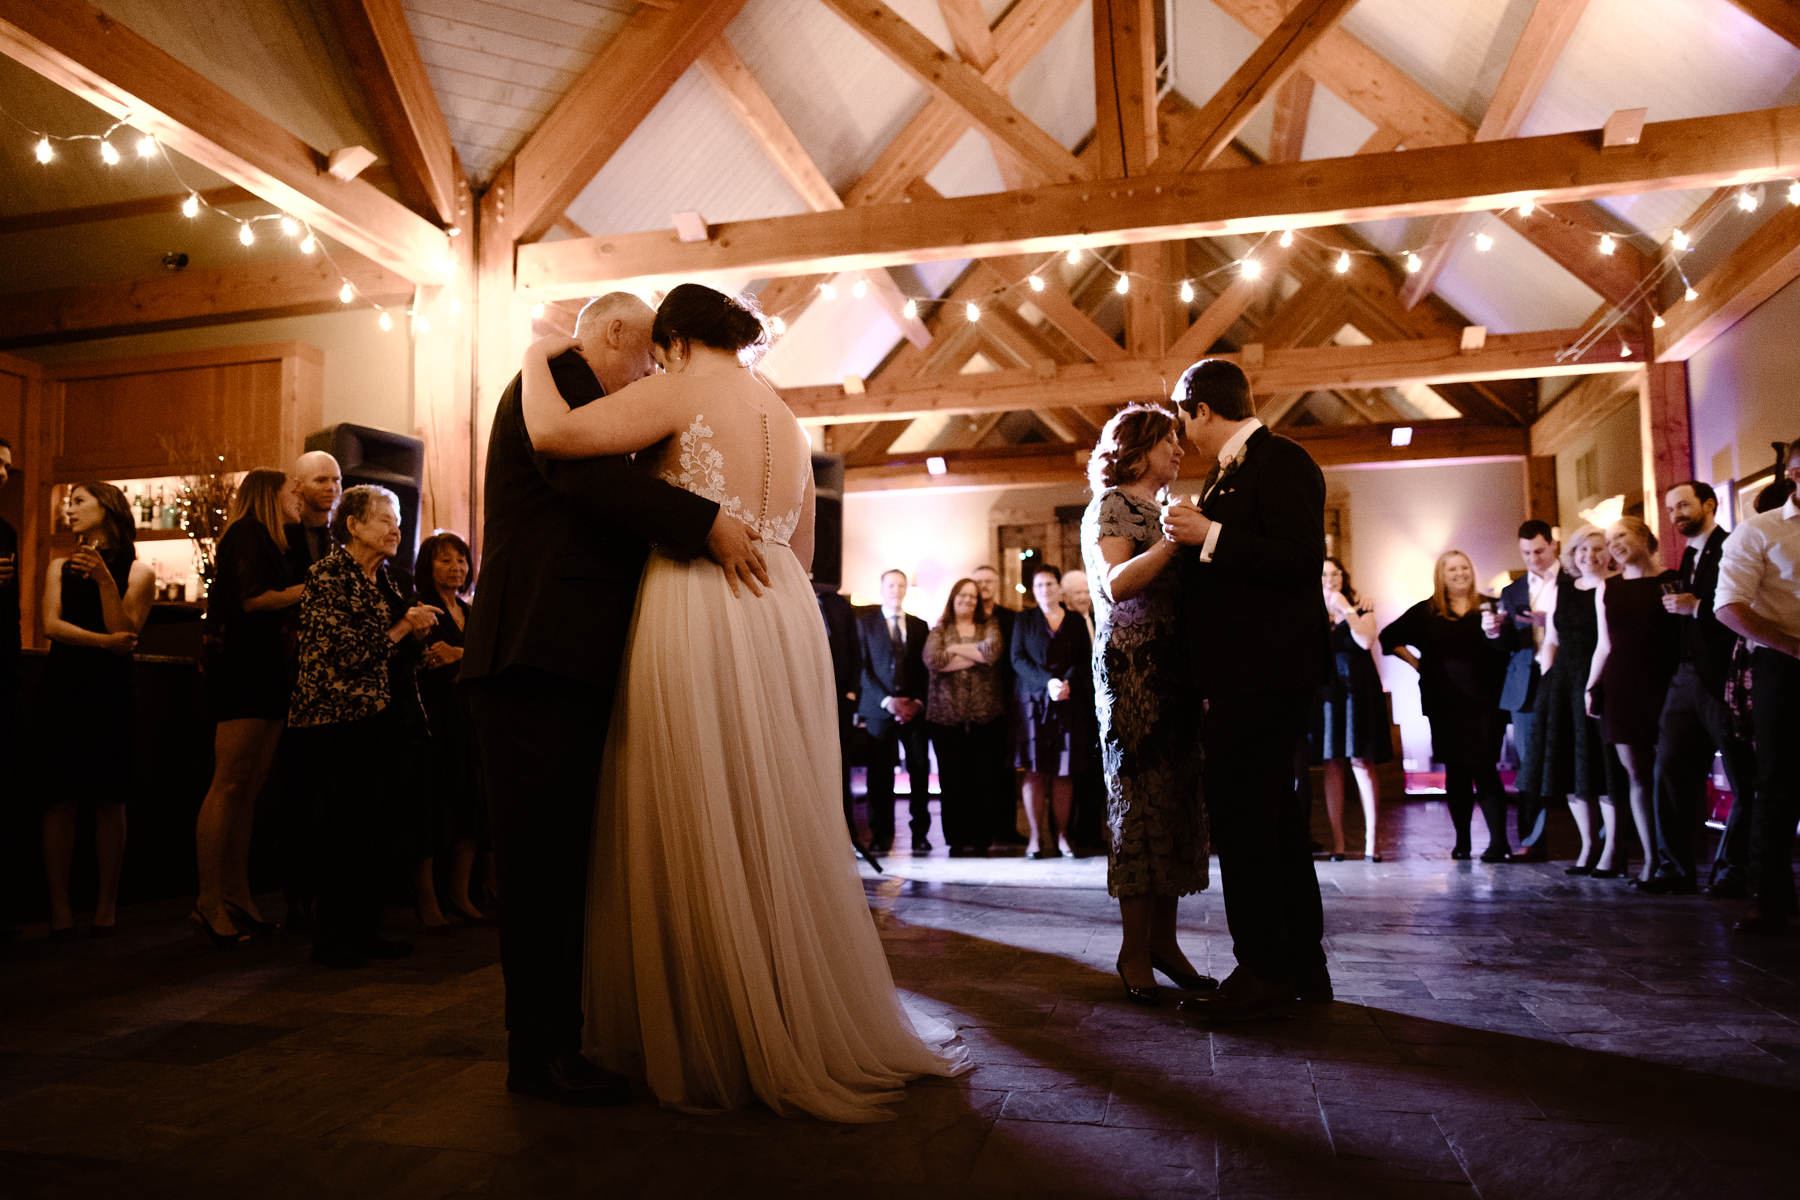 Invermere Wedding Photographers at Eagle Ranch and Panorama Ski Resort - Image 60